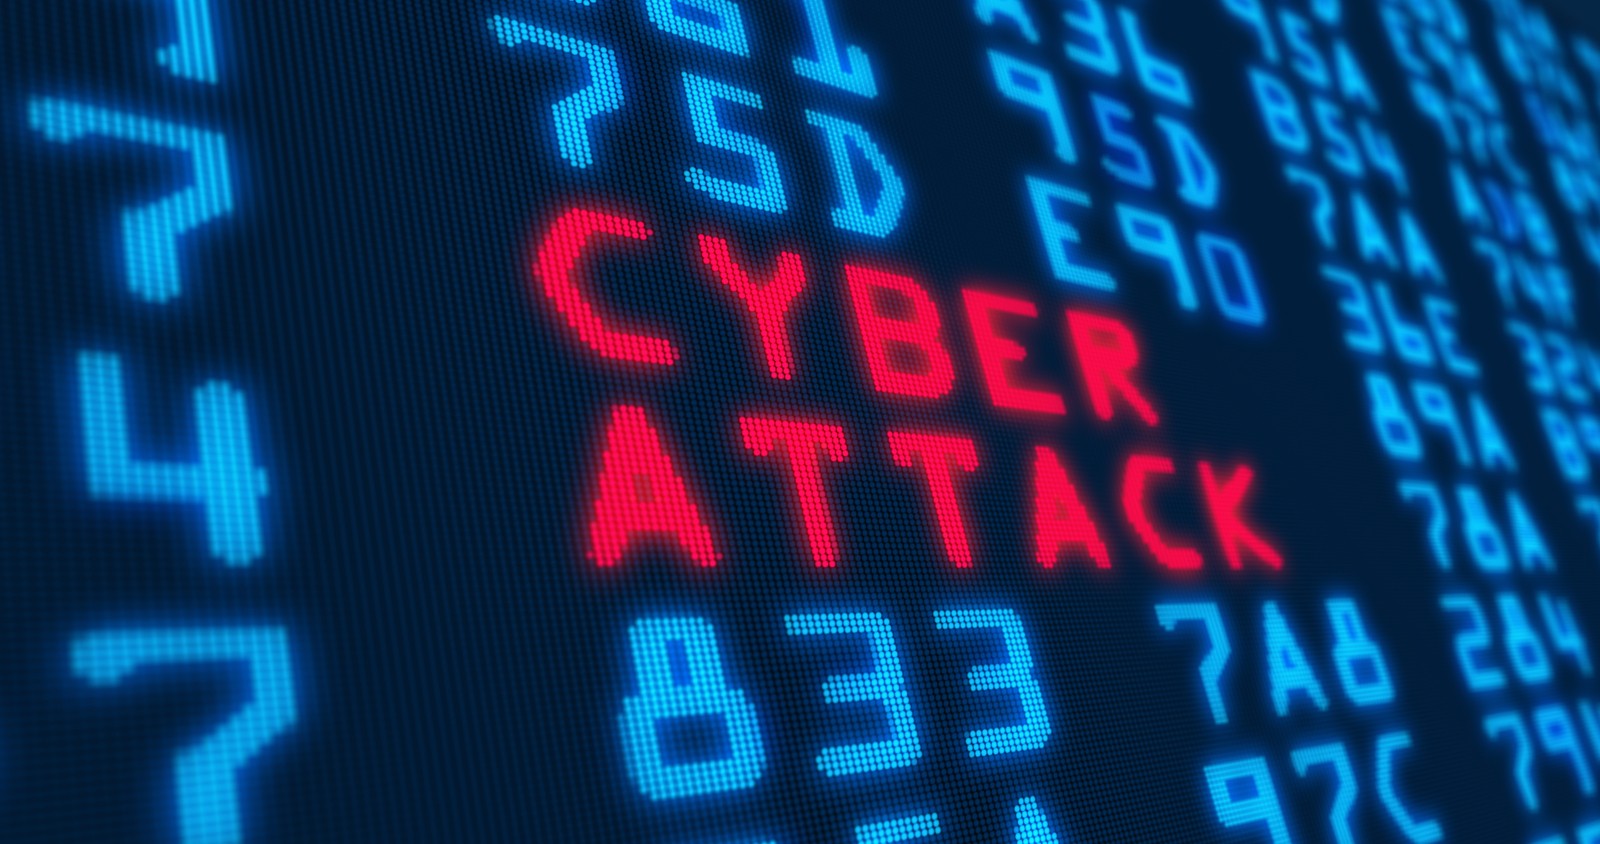 UK At Risk Of ‘Huge Cyber Attack’, Says Security Expert